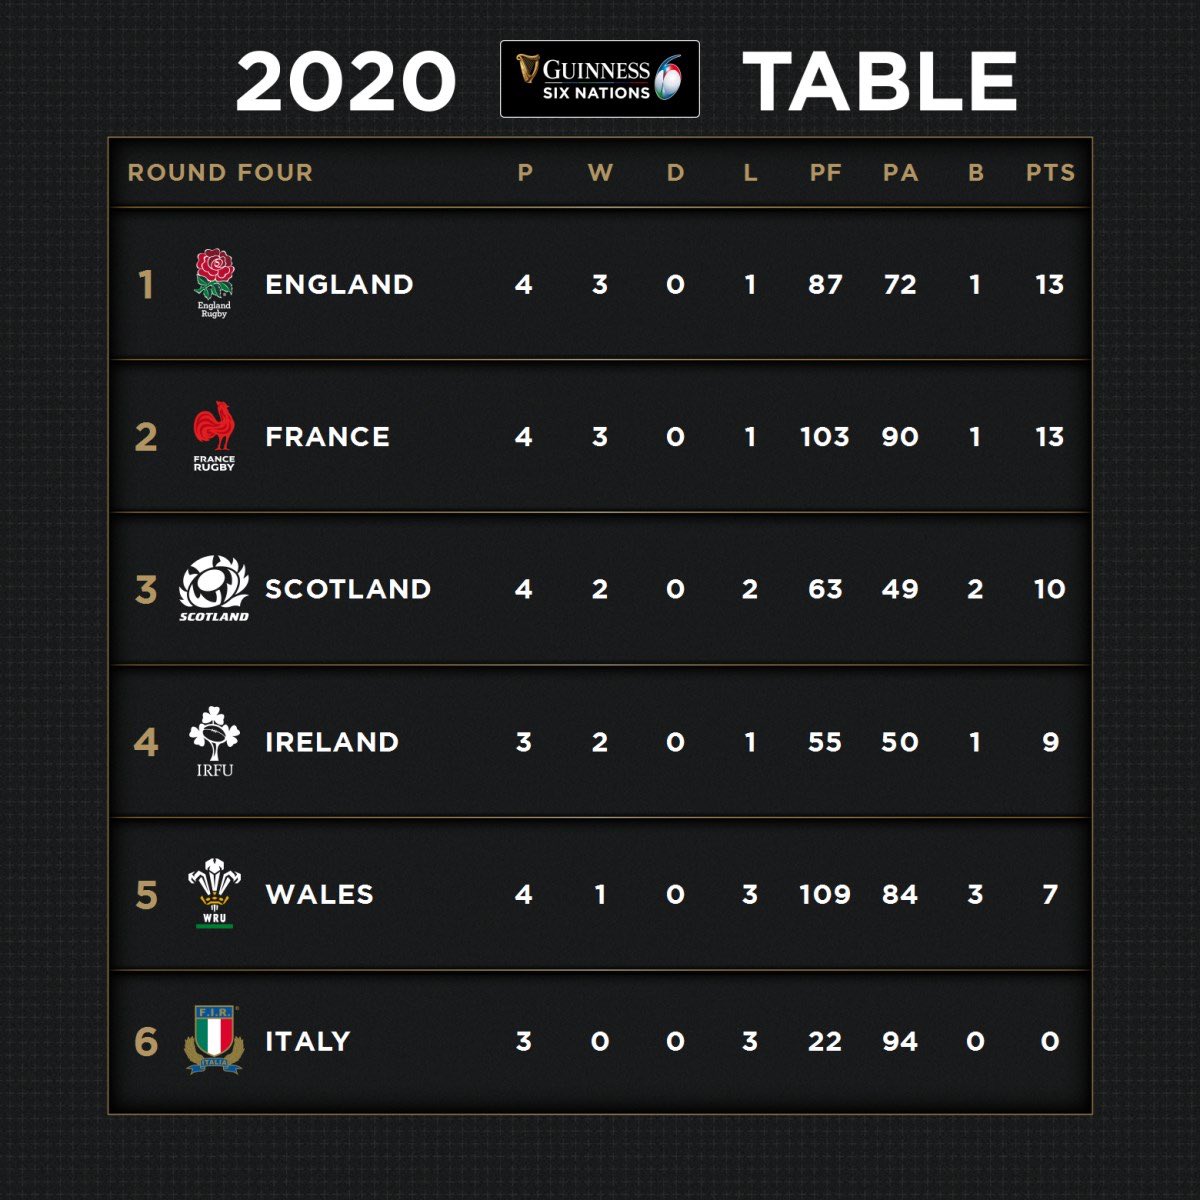 A reminder of how things currently stand in the 2020 Championship as we head into the final four games from October 24. Ireland, England, France and Scotland could all mathematically lift the trophy on October 31. #GuinnessSixNations